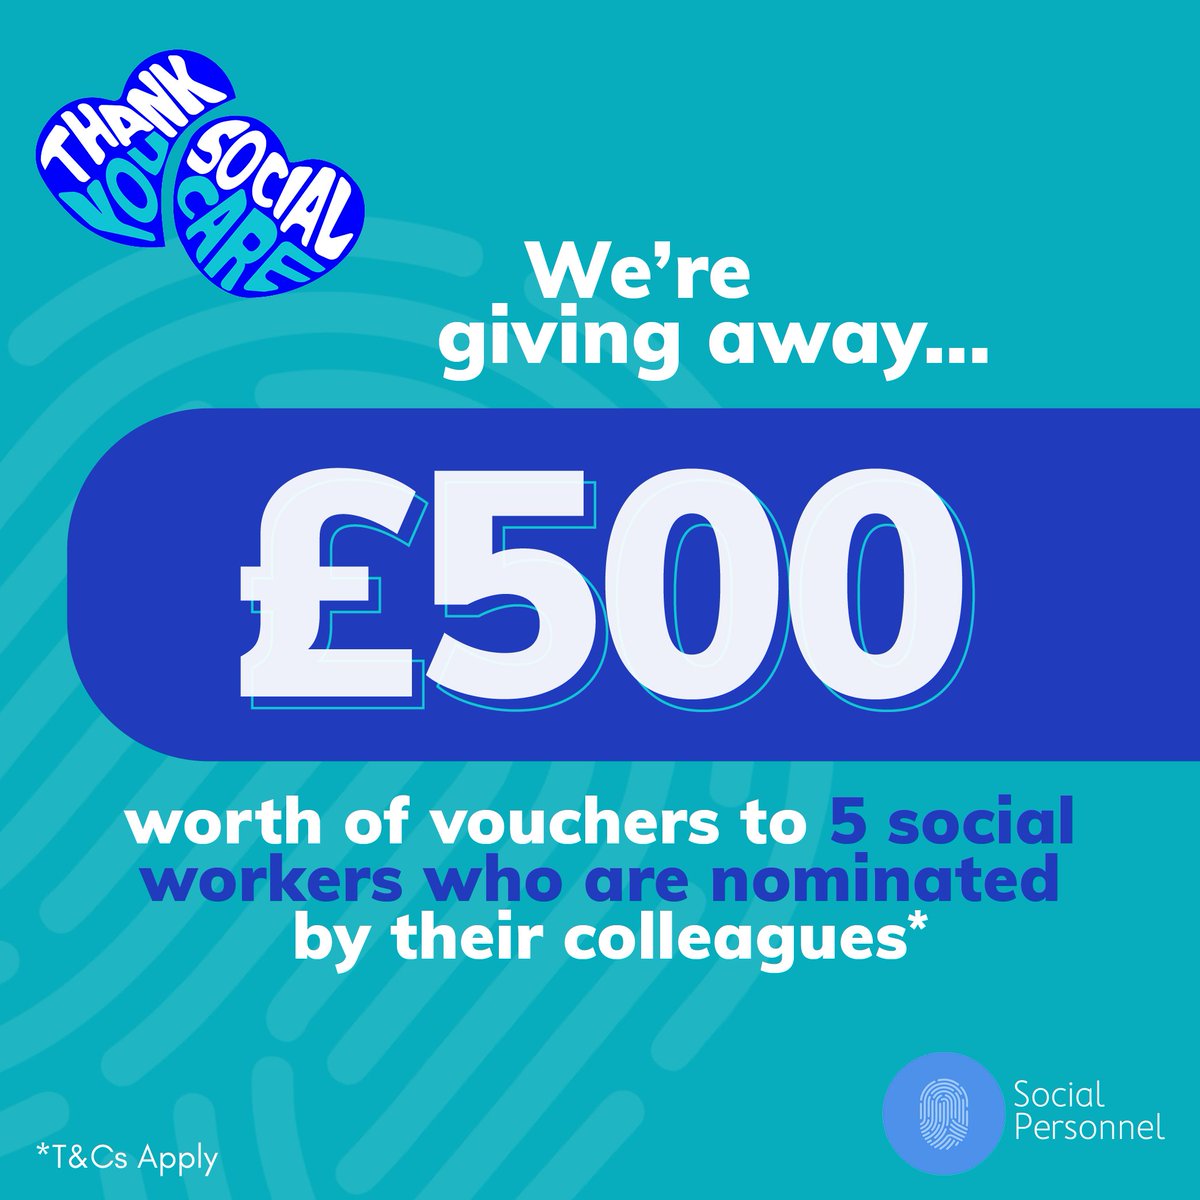 This #SocialWorkWeek, we are bringing back our #ThankYouSocialCare campaign! 💙

It's a chance for you to give back to a #socialwork colleague by nominating someone who goes above and beyond in their role.

Fill out our nomination form here 👉 loom.ly/wHs2W5M